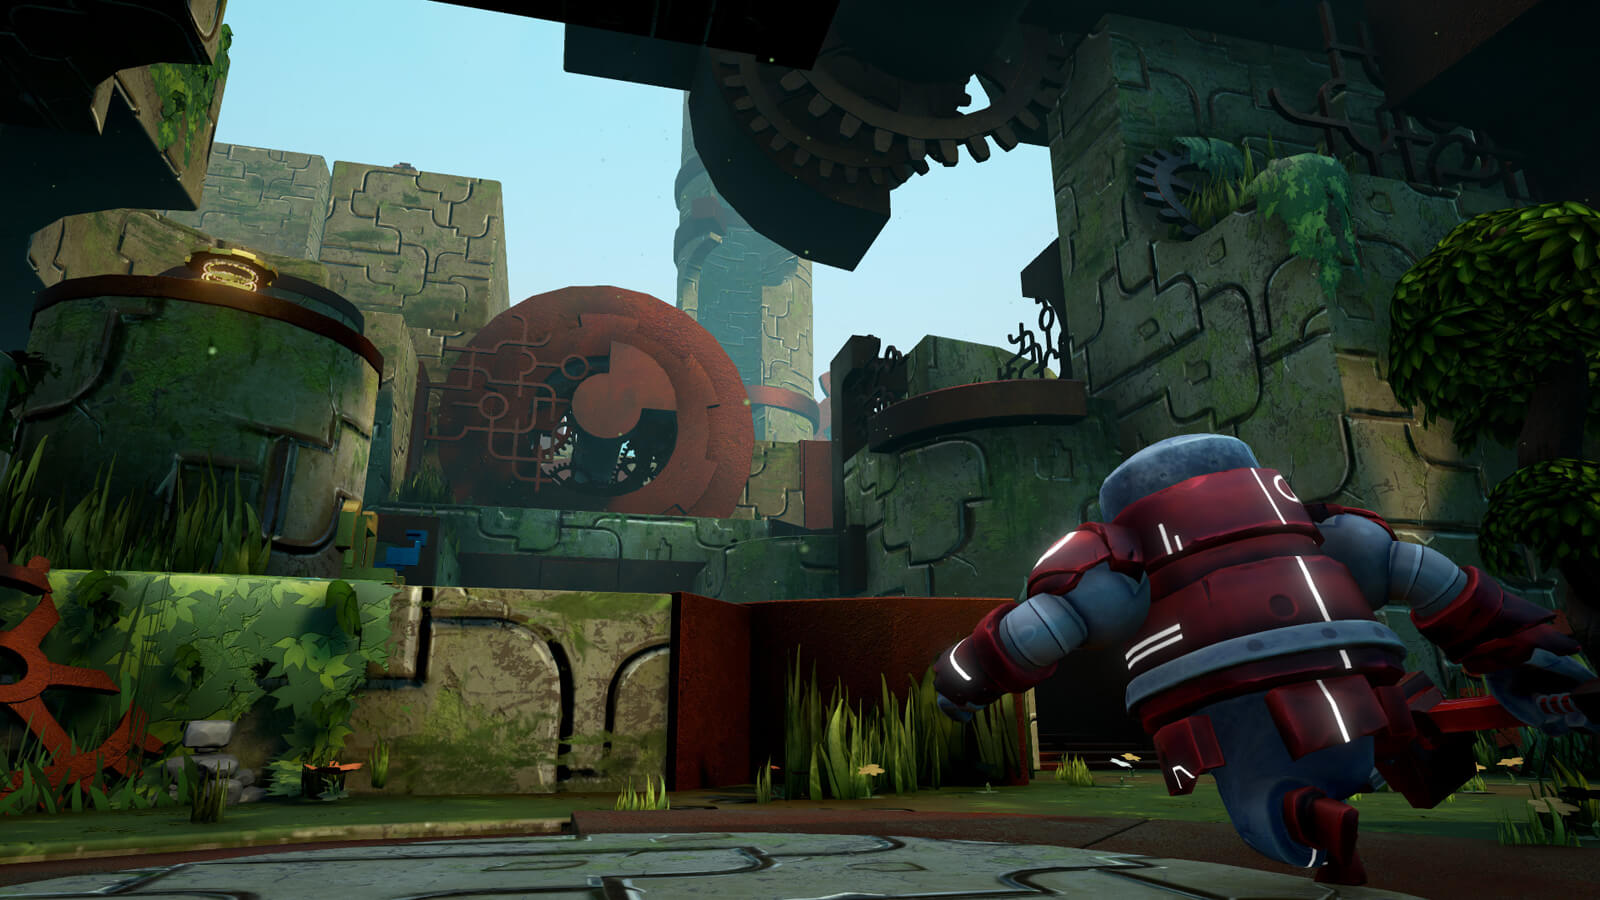 A red robot runs towards a stone structure overgrown with green foliage. 